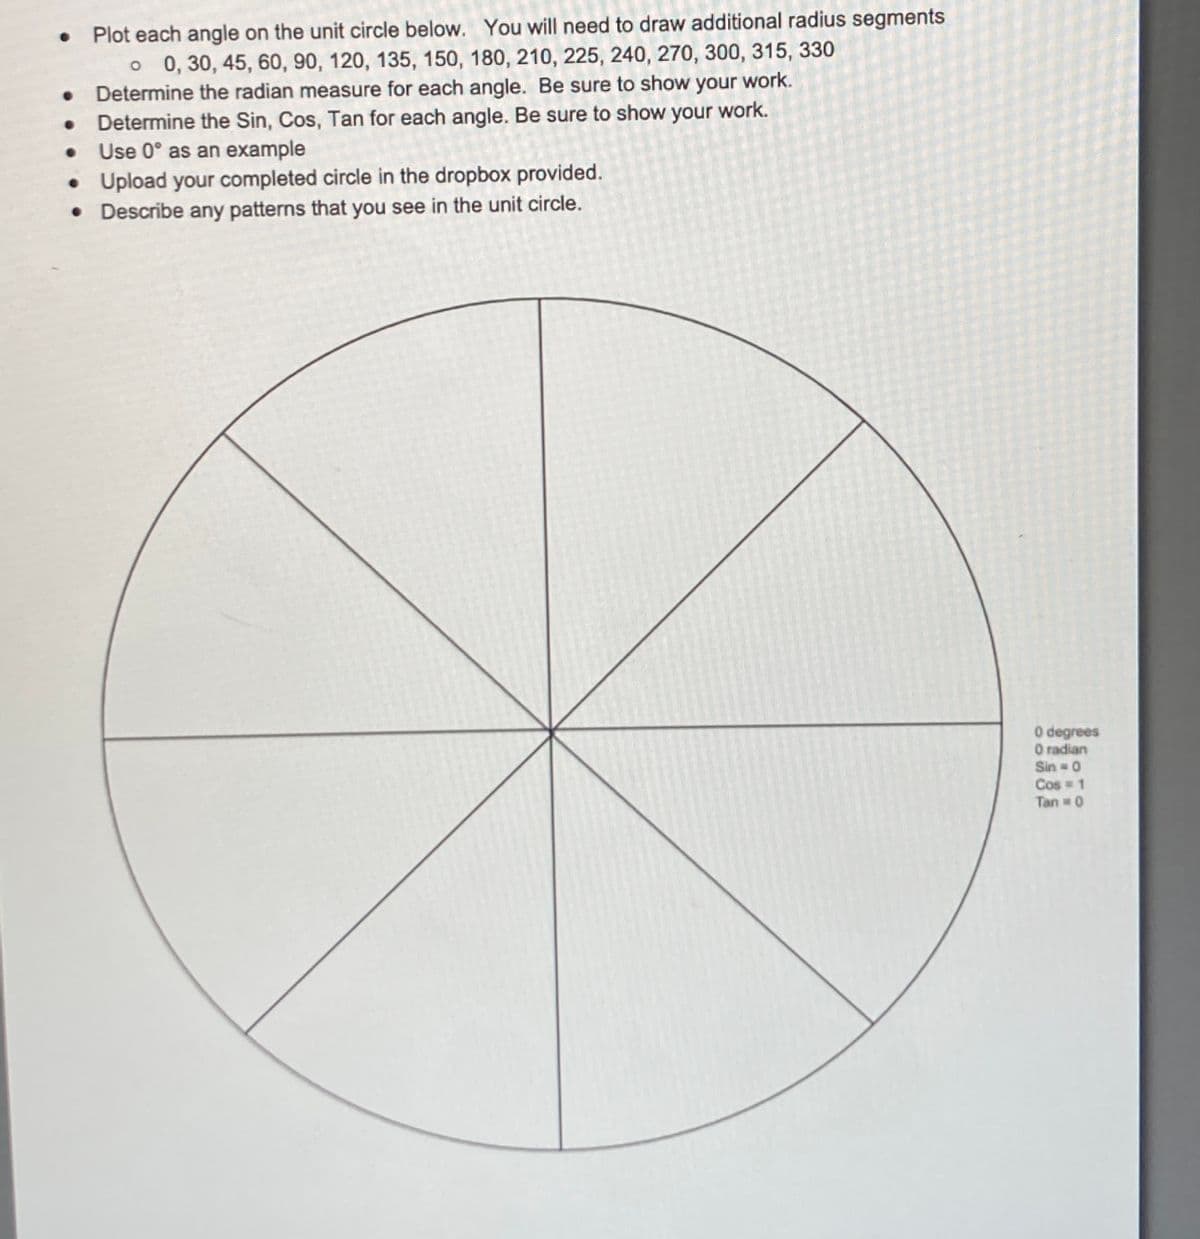 0 Plot each angle on the unit circle below. You will need to draw additional radius segments
•
o 0, 30, 45, 60, 90, 120, 135, 150, 180, 210, 225, 240, 270, 300, 315, 330
Determine the radian measure for each angle. Be sure to show your work.
Determine the Sin, Cos, Tan for each angle. Be sure to show your work.
Use 0° as an example
•
●
•
Upload your completed circle in the dropbox provided.
• Describe any patterns that you see in the unit circle.
0 degrees
O radian
Sin = 0
Cos = 1
Tan = 0